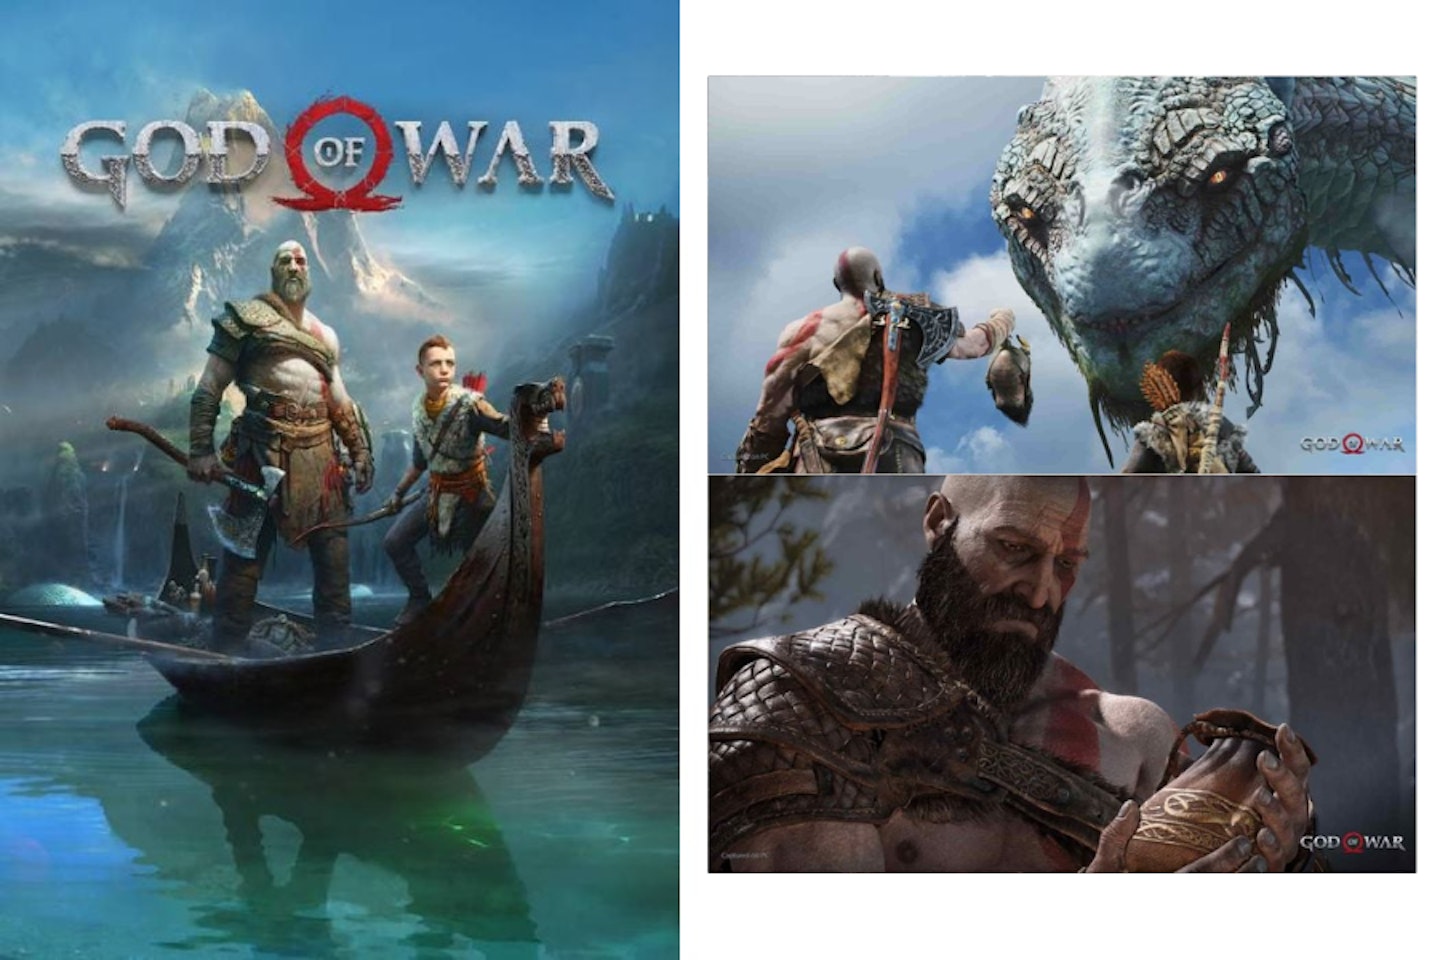 God of War - one of the best PC games